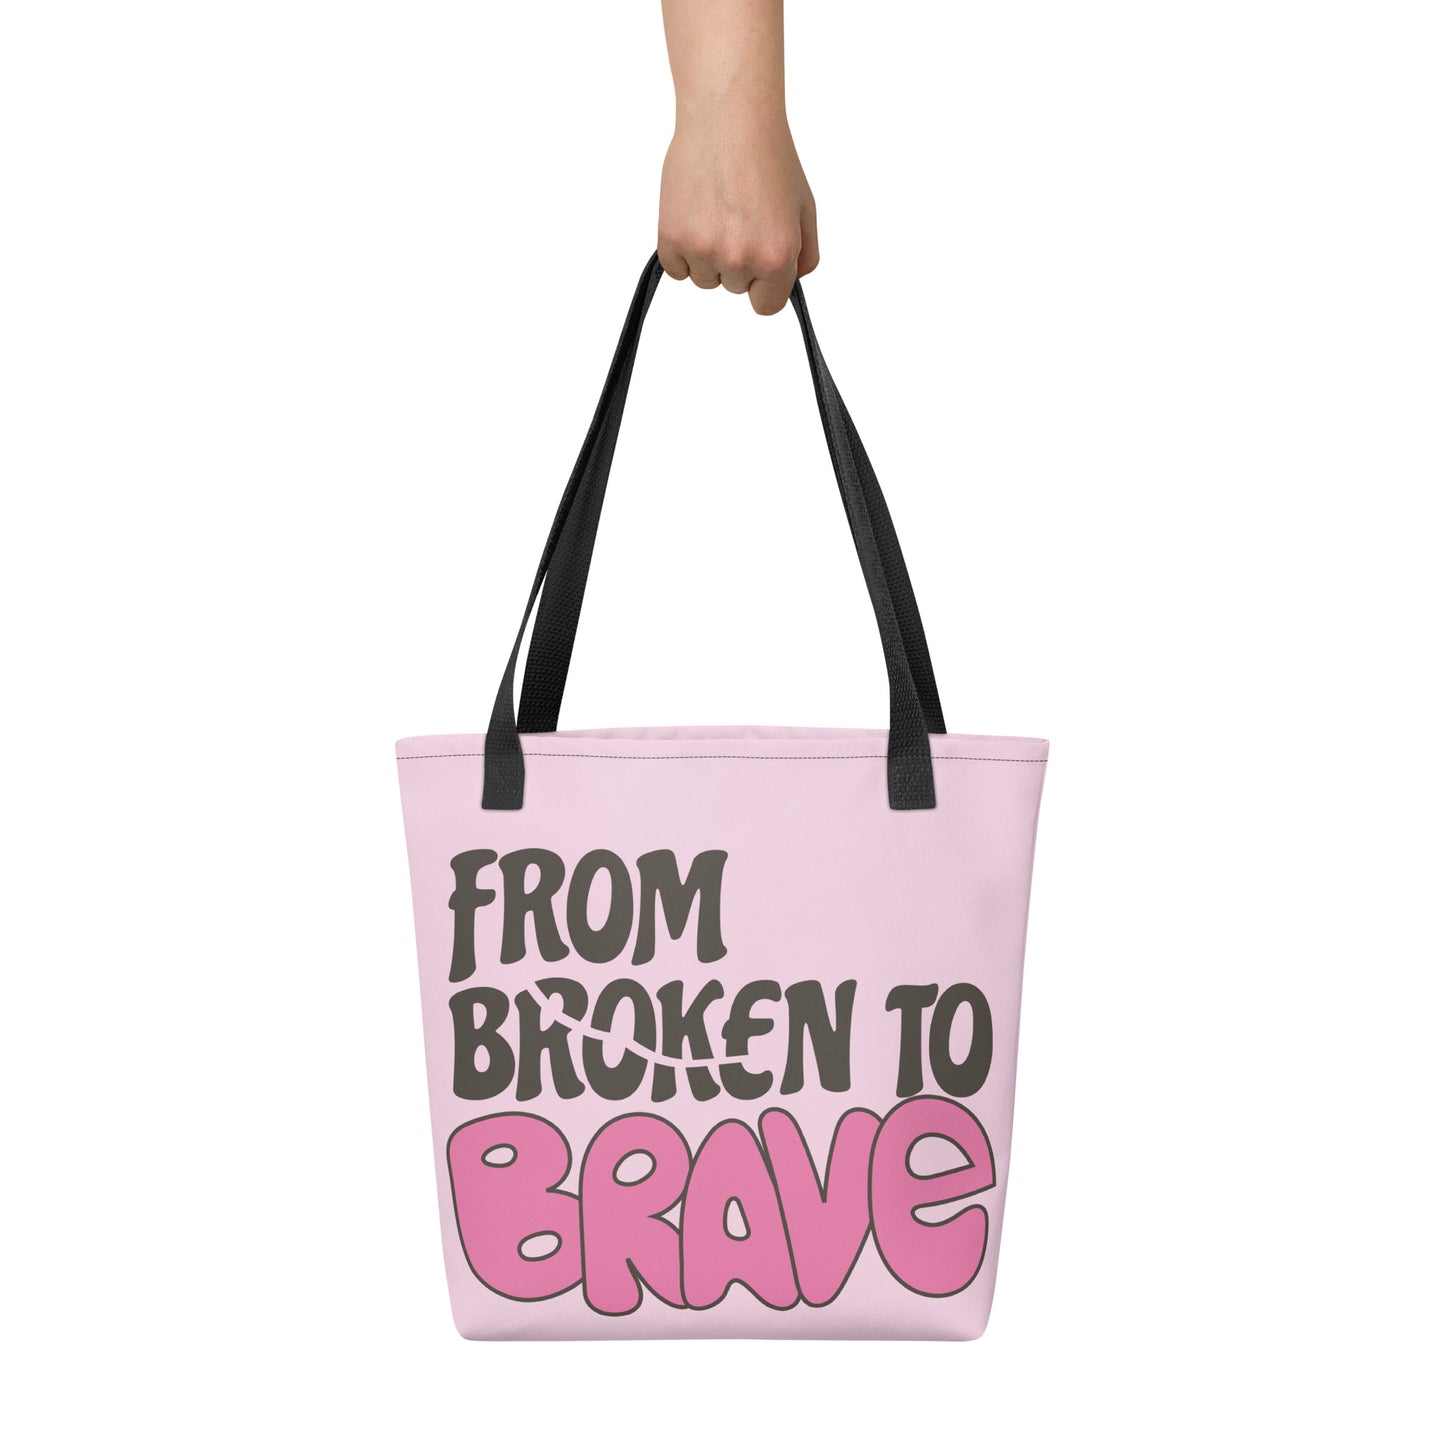 From broken to brave tote bag 